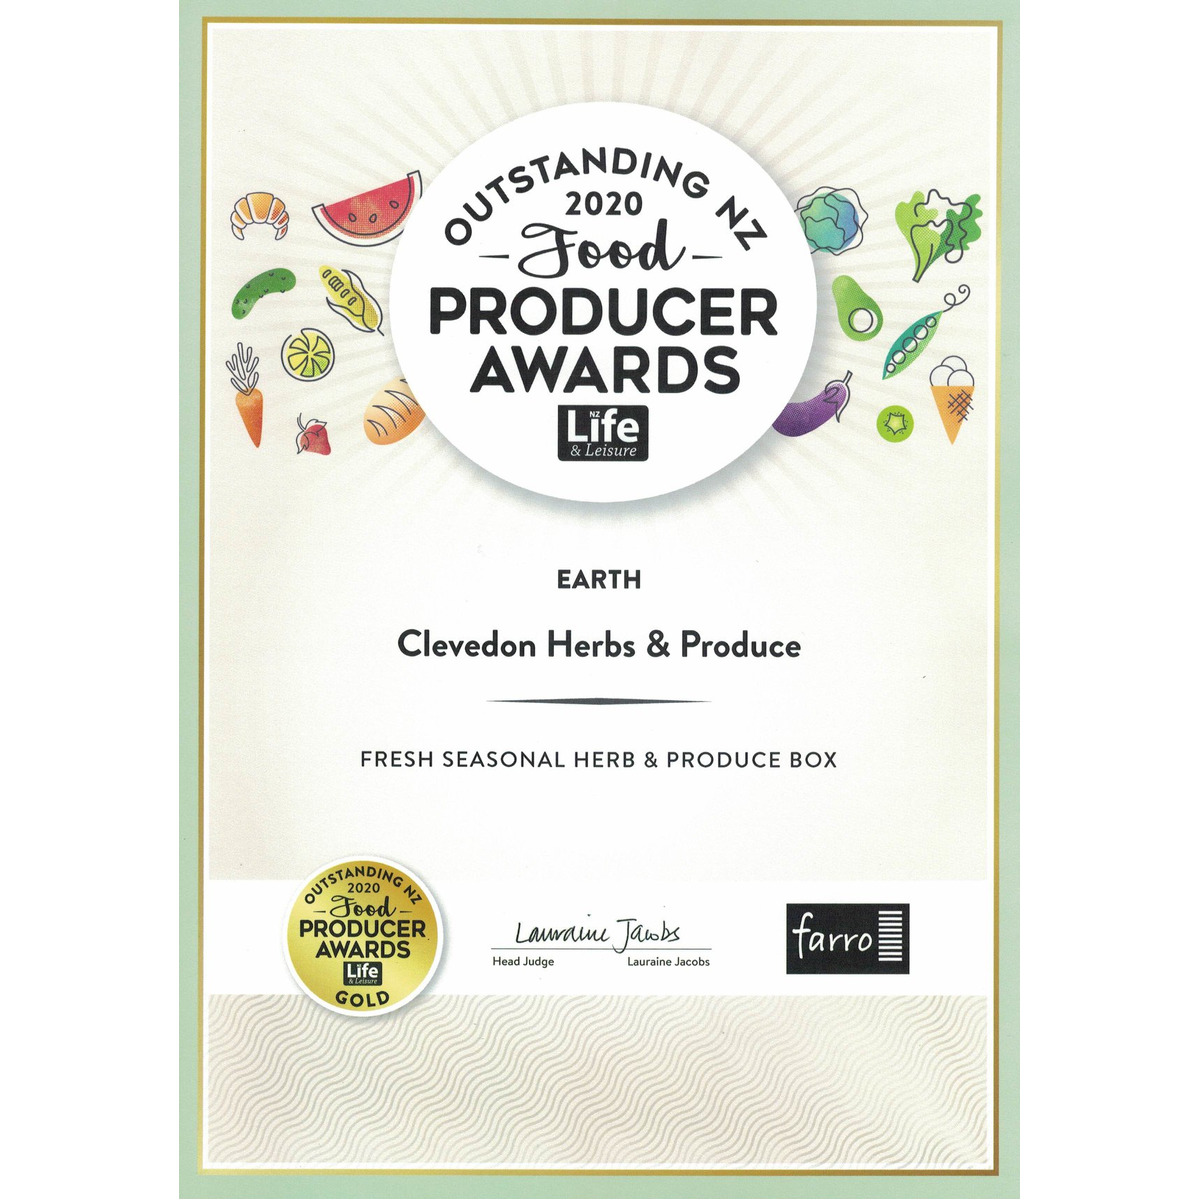 GOLD award in the 2020 Outstanding New Zealand Food Producers awards